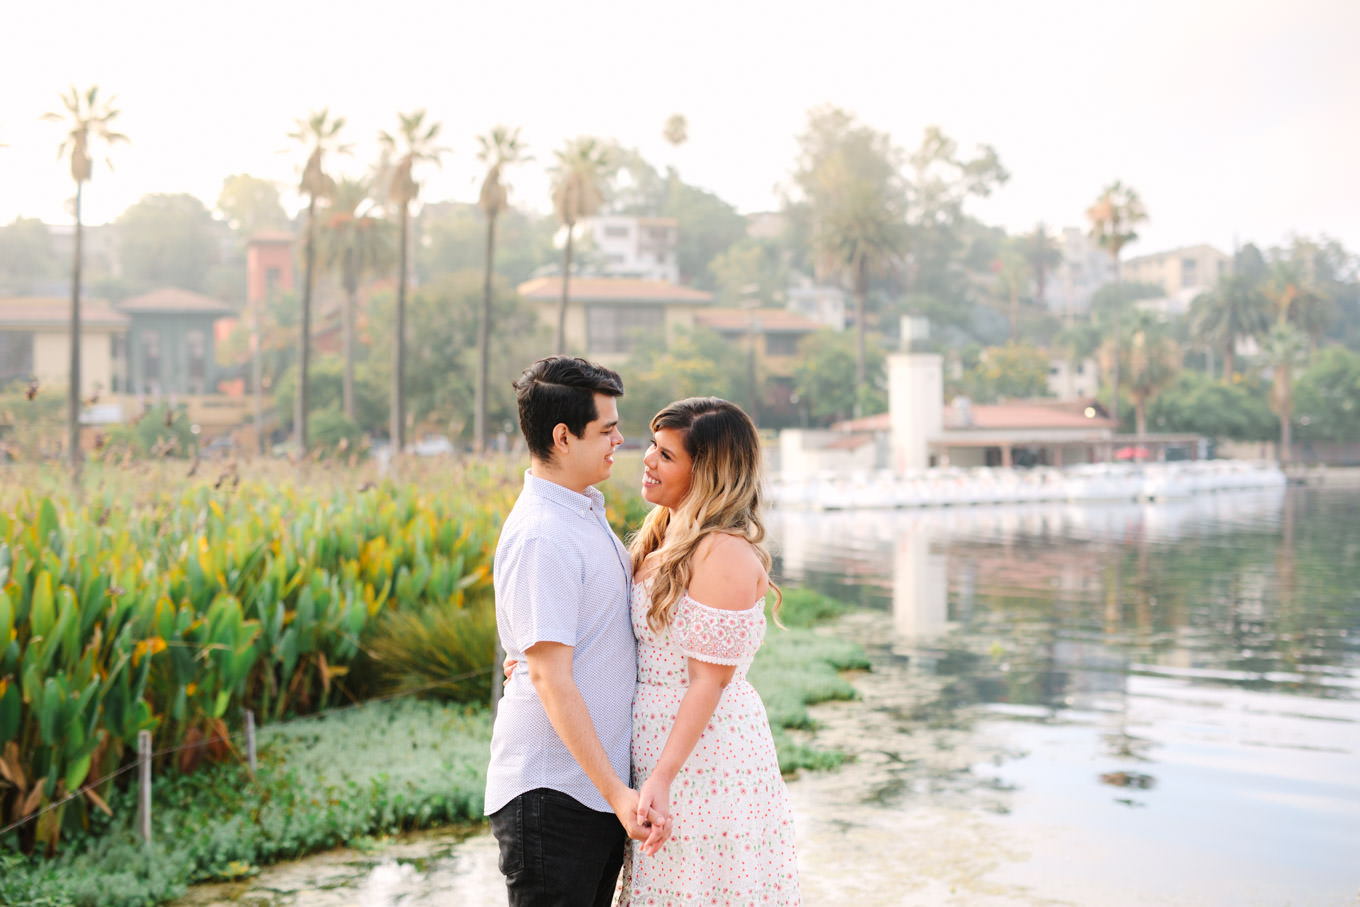 Echo Park Lake engagement session at sunrise | Engagement, elopement, and wedding photography roundup of Mary Costa’s favorite images from 2020 | Colorful and elevated photography for fun-loving couples in Southern California | #2020wedding #elopement #weddingphoto #weddingphotography #microwedding   Source: Mary Costa Photography | Los Angeles